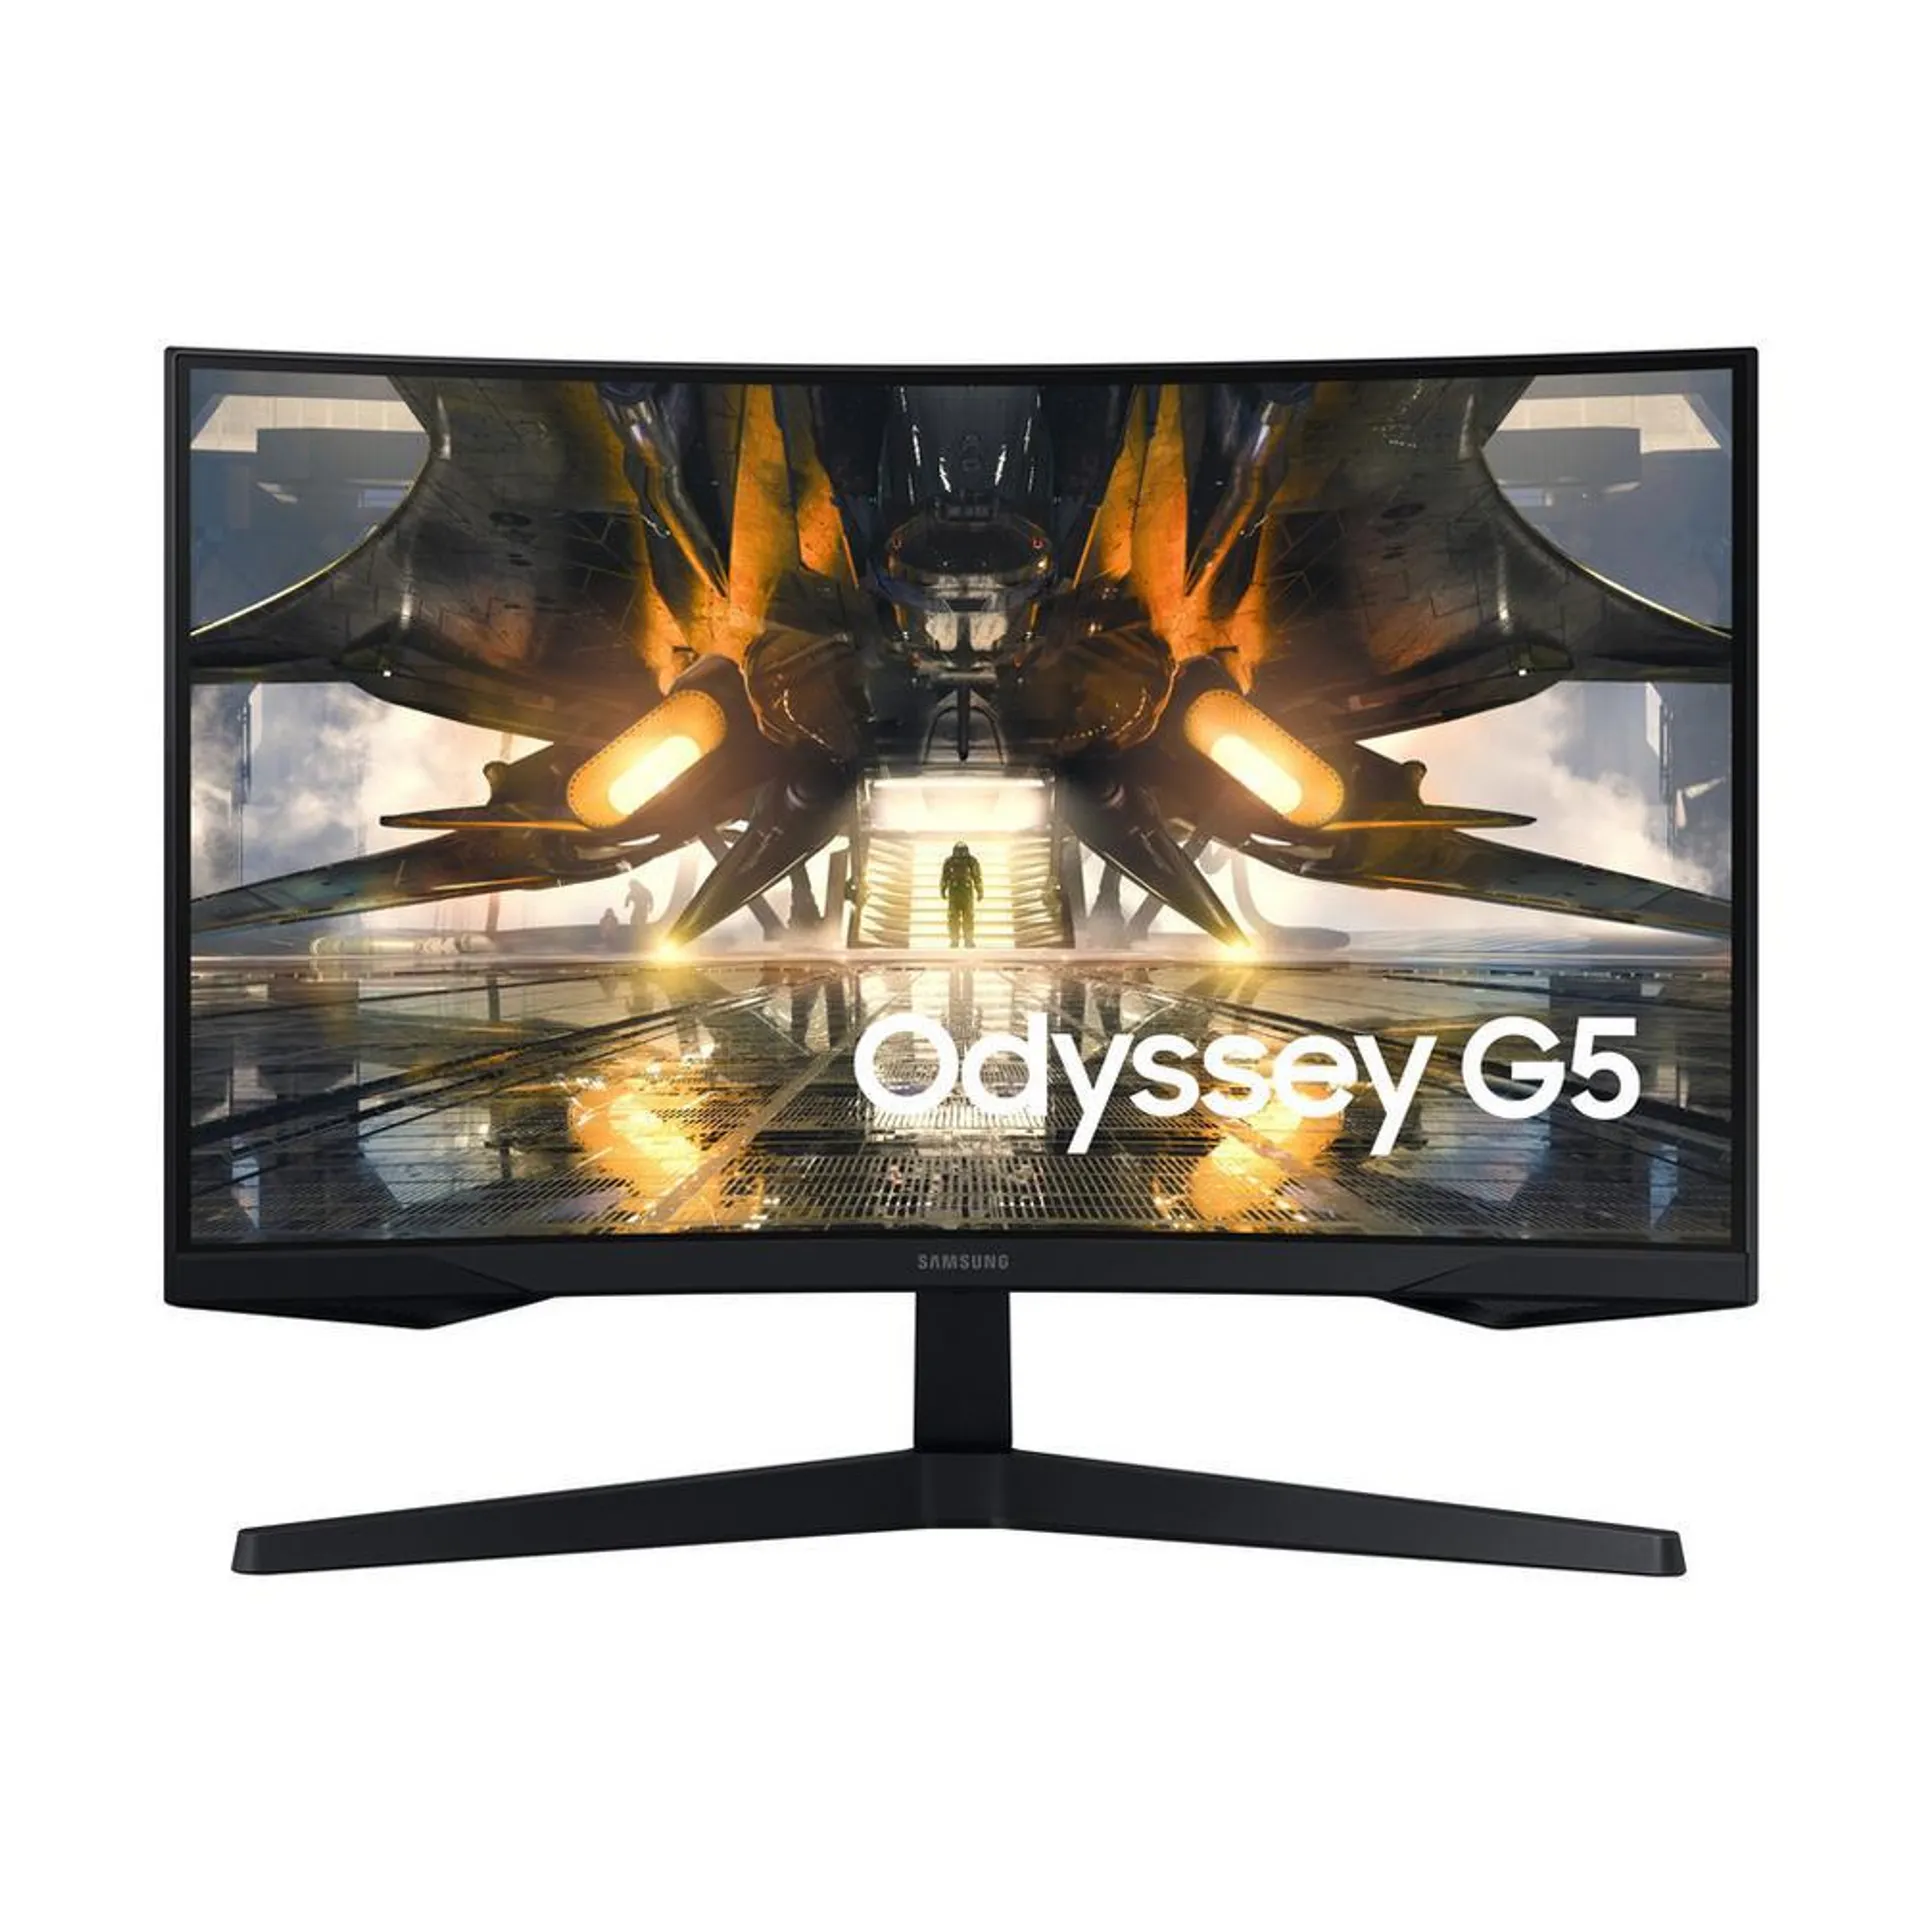 27" Curved QHD LED Gaming Monitor